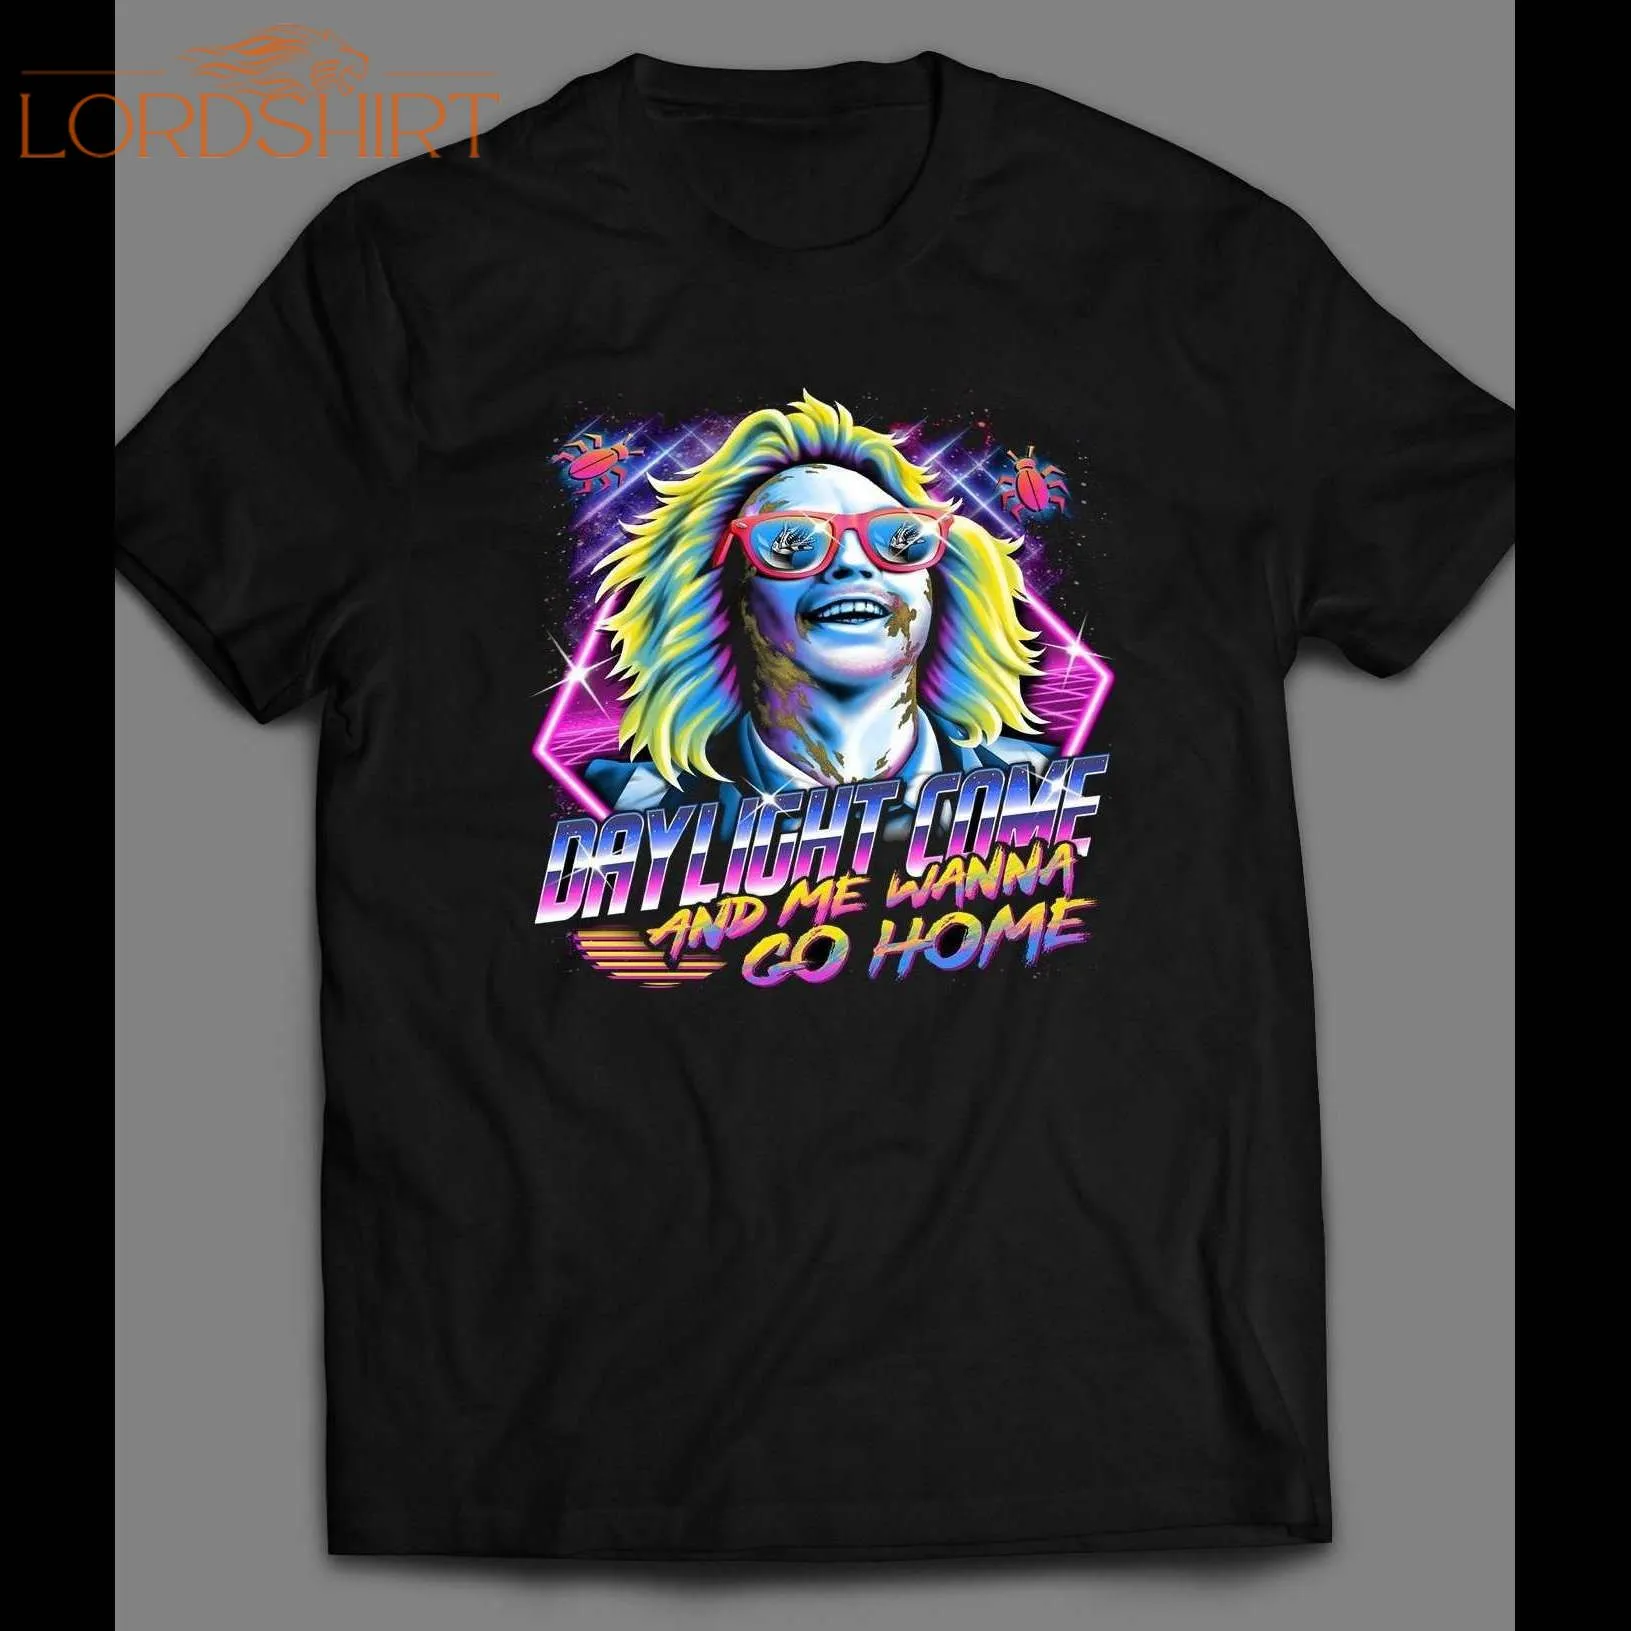 Beetlejuice Daylight Come Out Vintage Movie Shirt